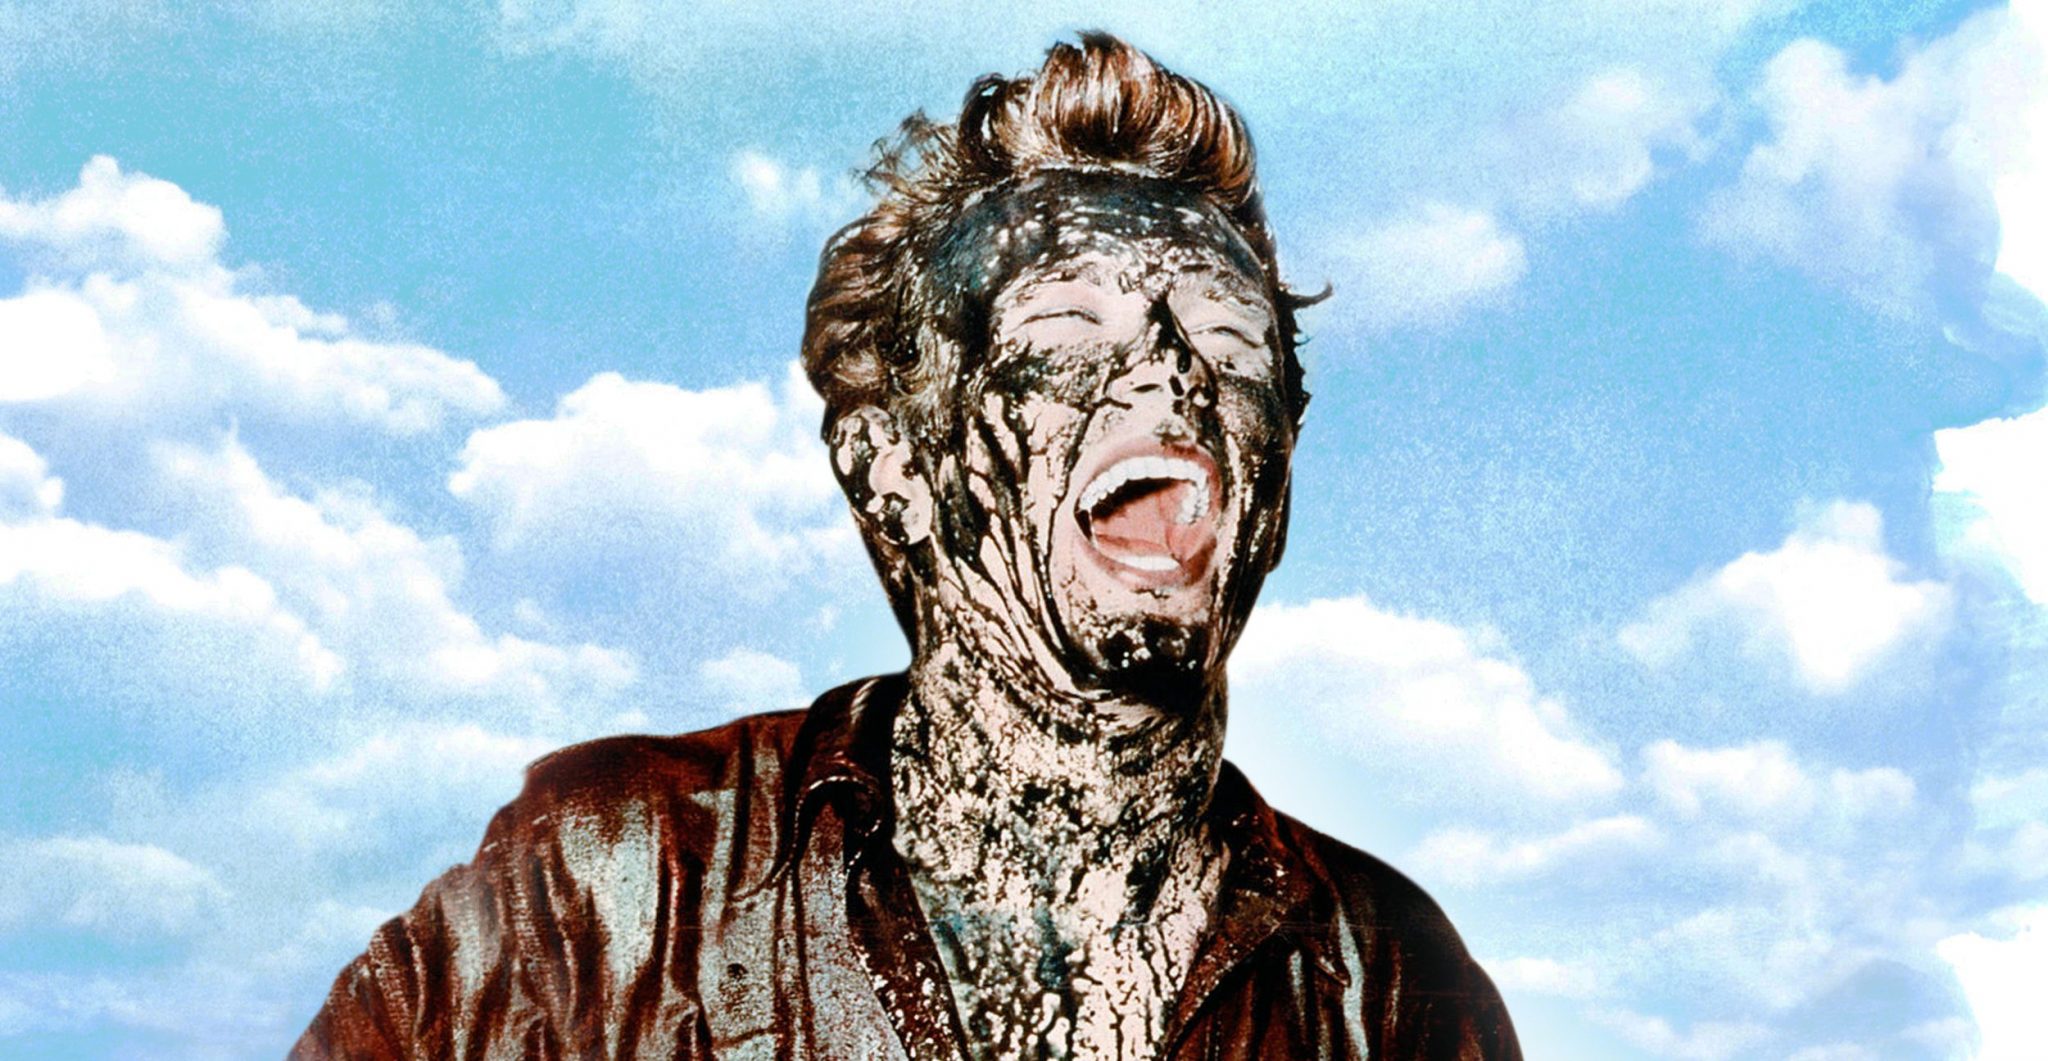 James Dean covered in oil in publicity portrait for the film 'Giant', 1956. (Photo by Warner Brothers/Getty Images)